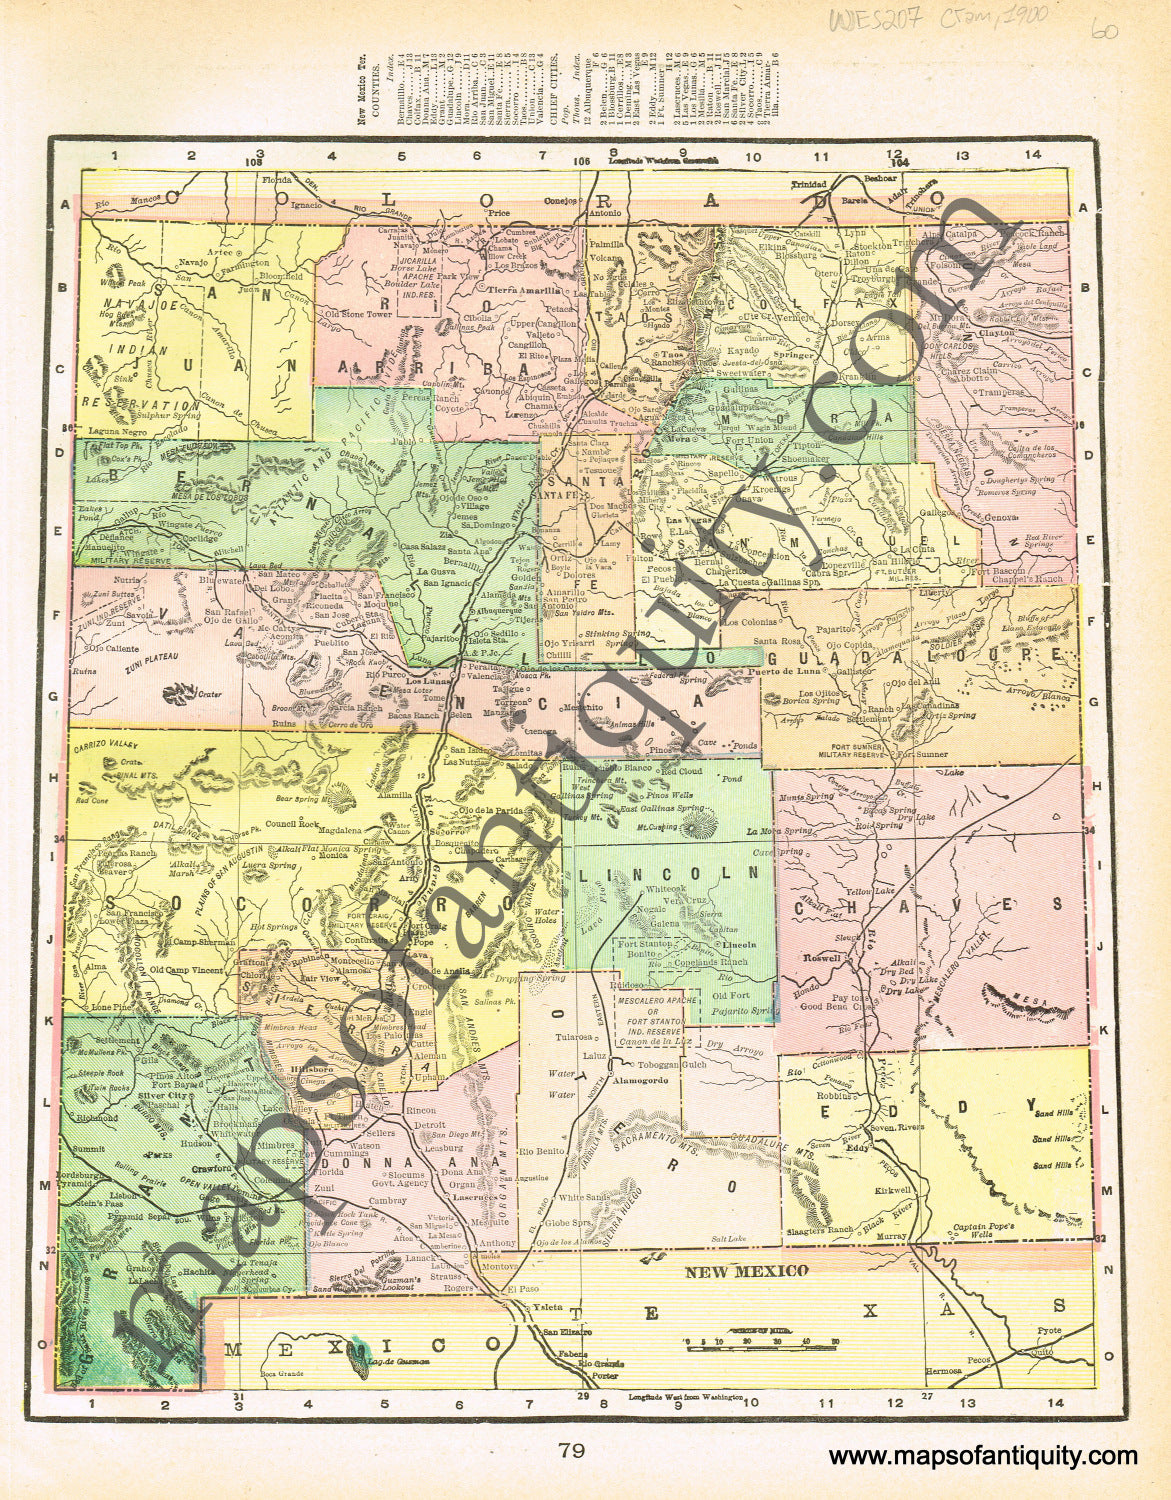 Antique-Printed-Color-Map-New-Mexico-verso:-Arizona-North-America-West-1900-Cram-Maps-Of-Antiquity